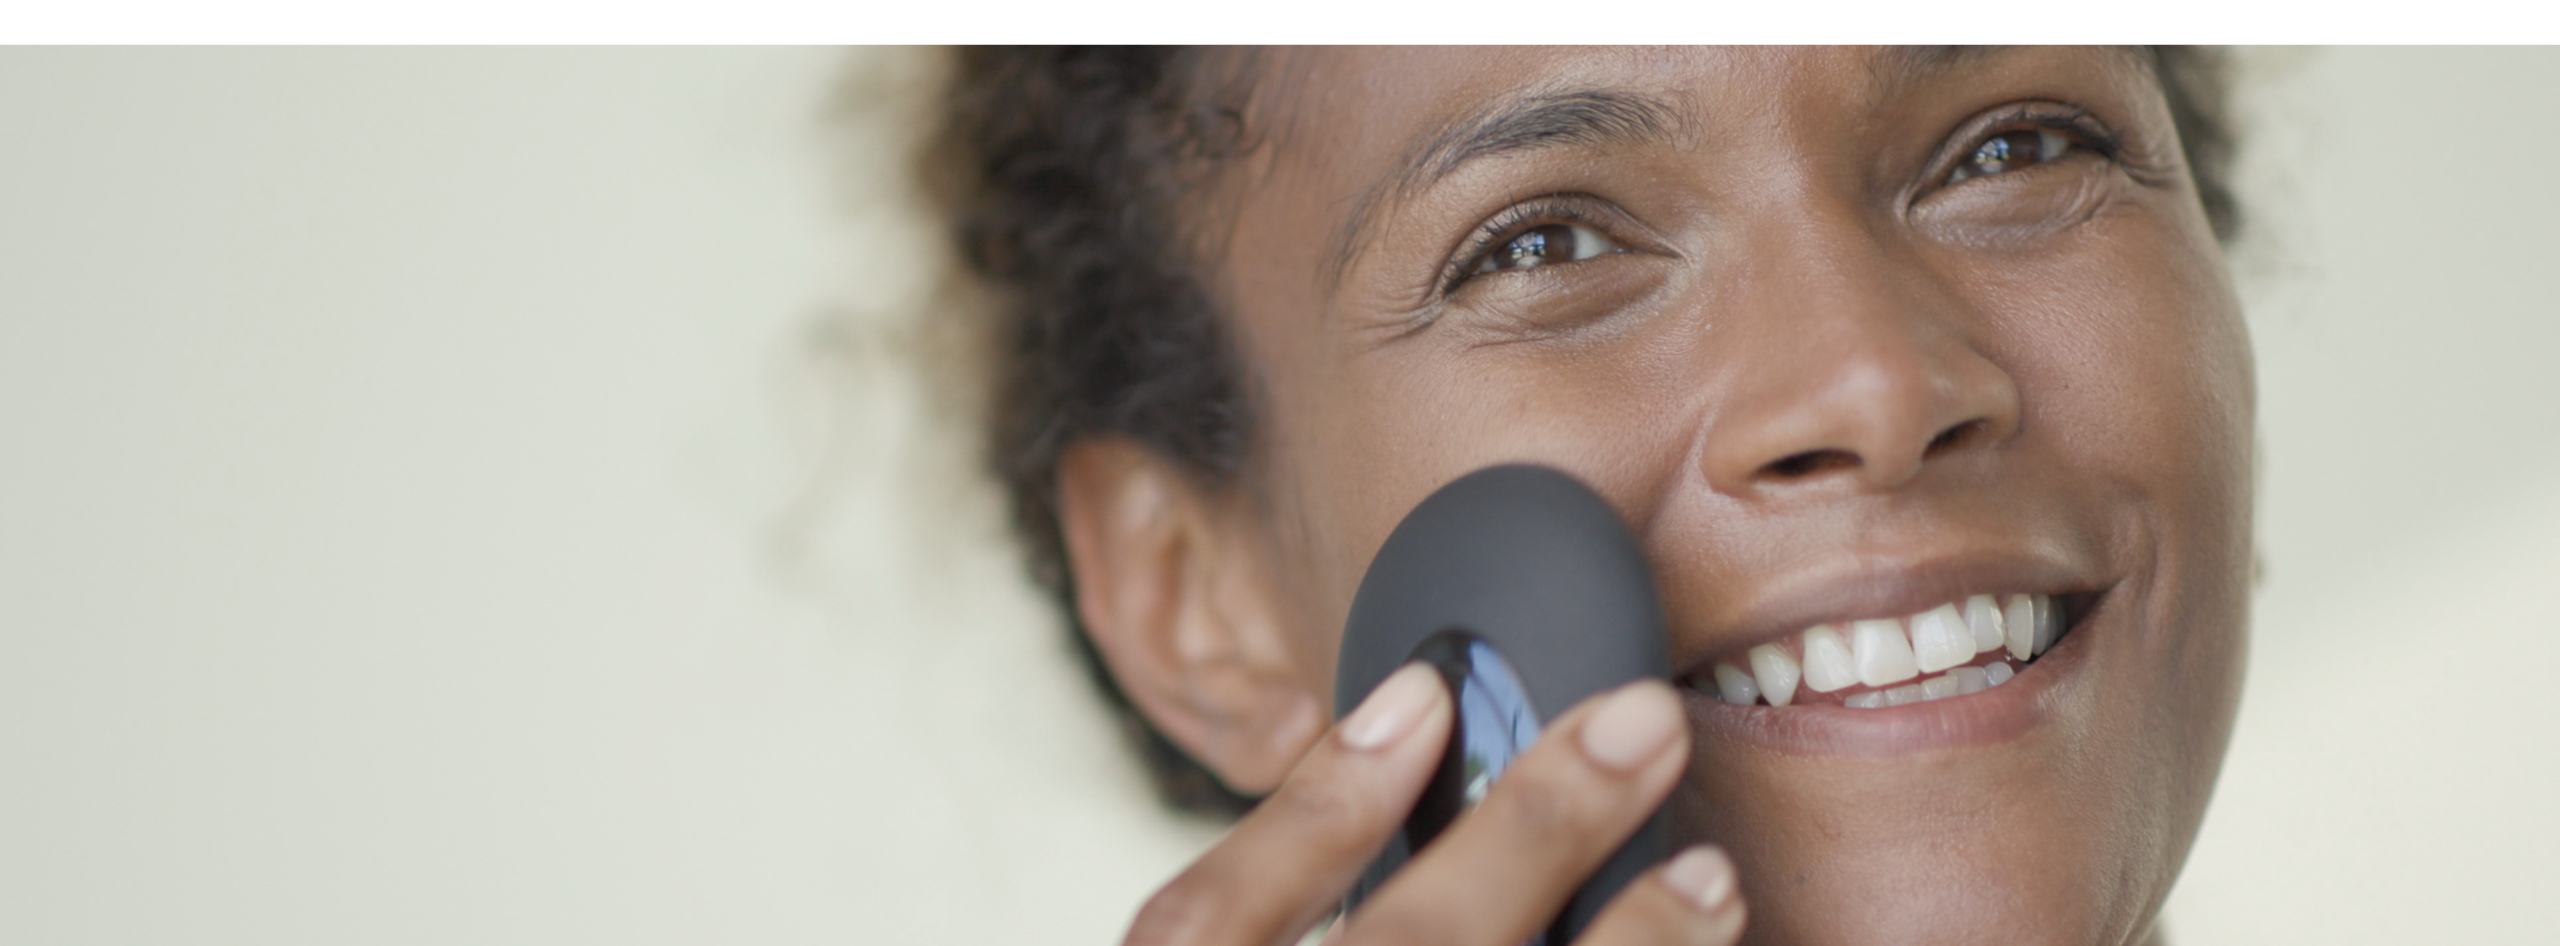 How To Use A Facial Cleansing Brush